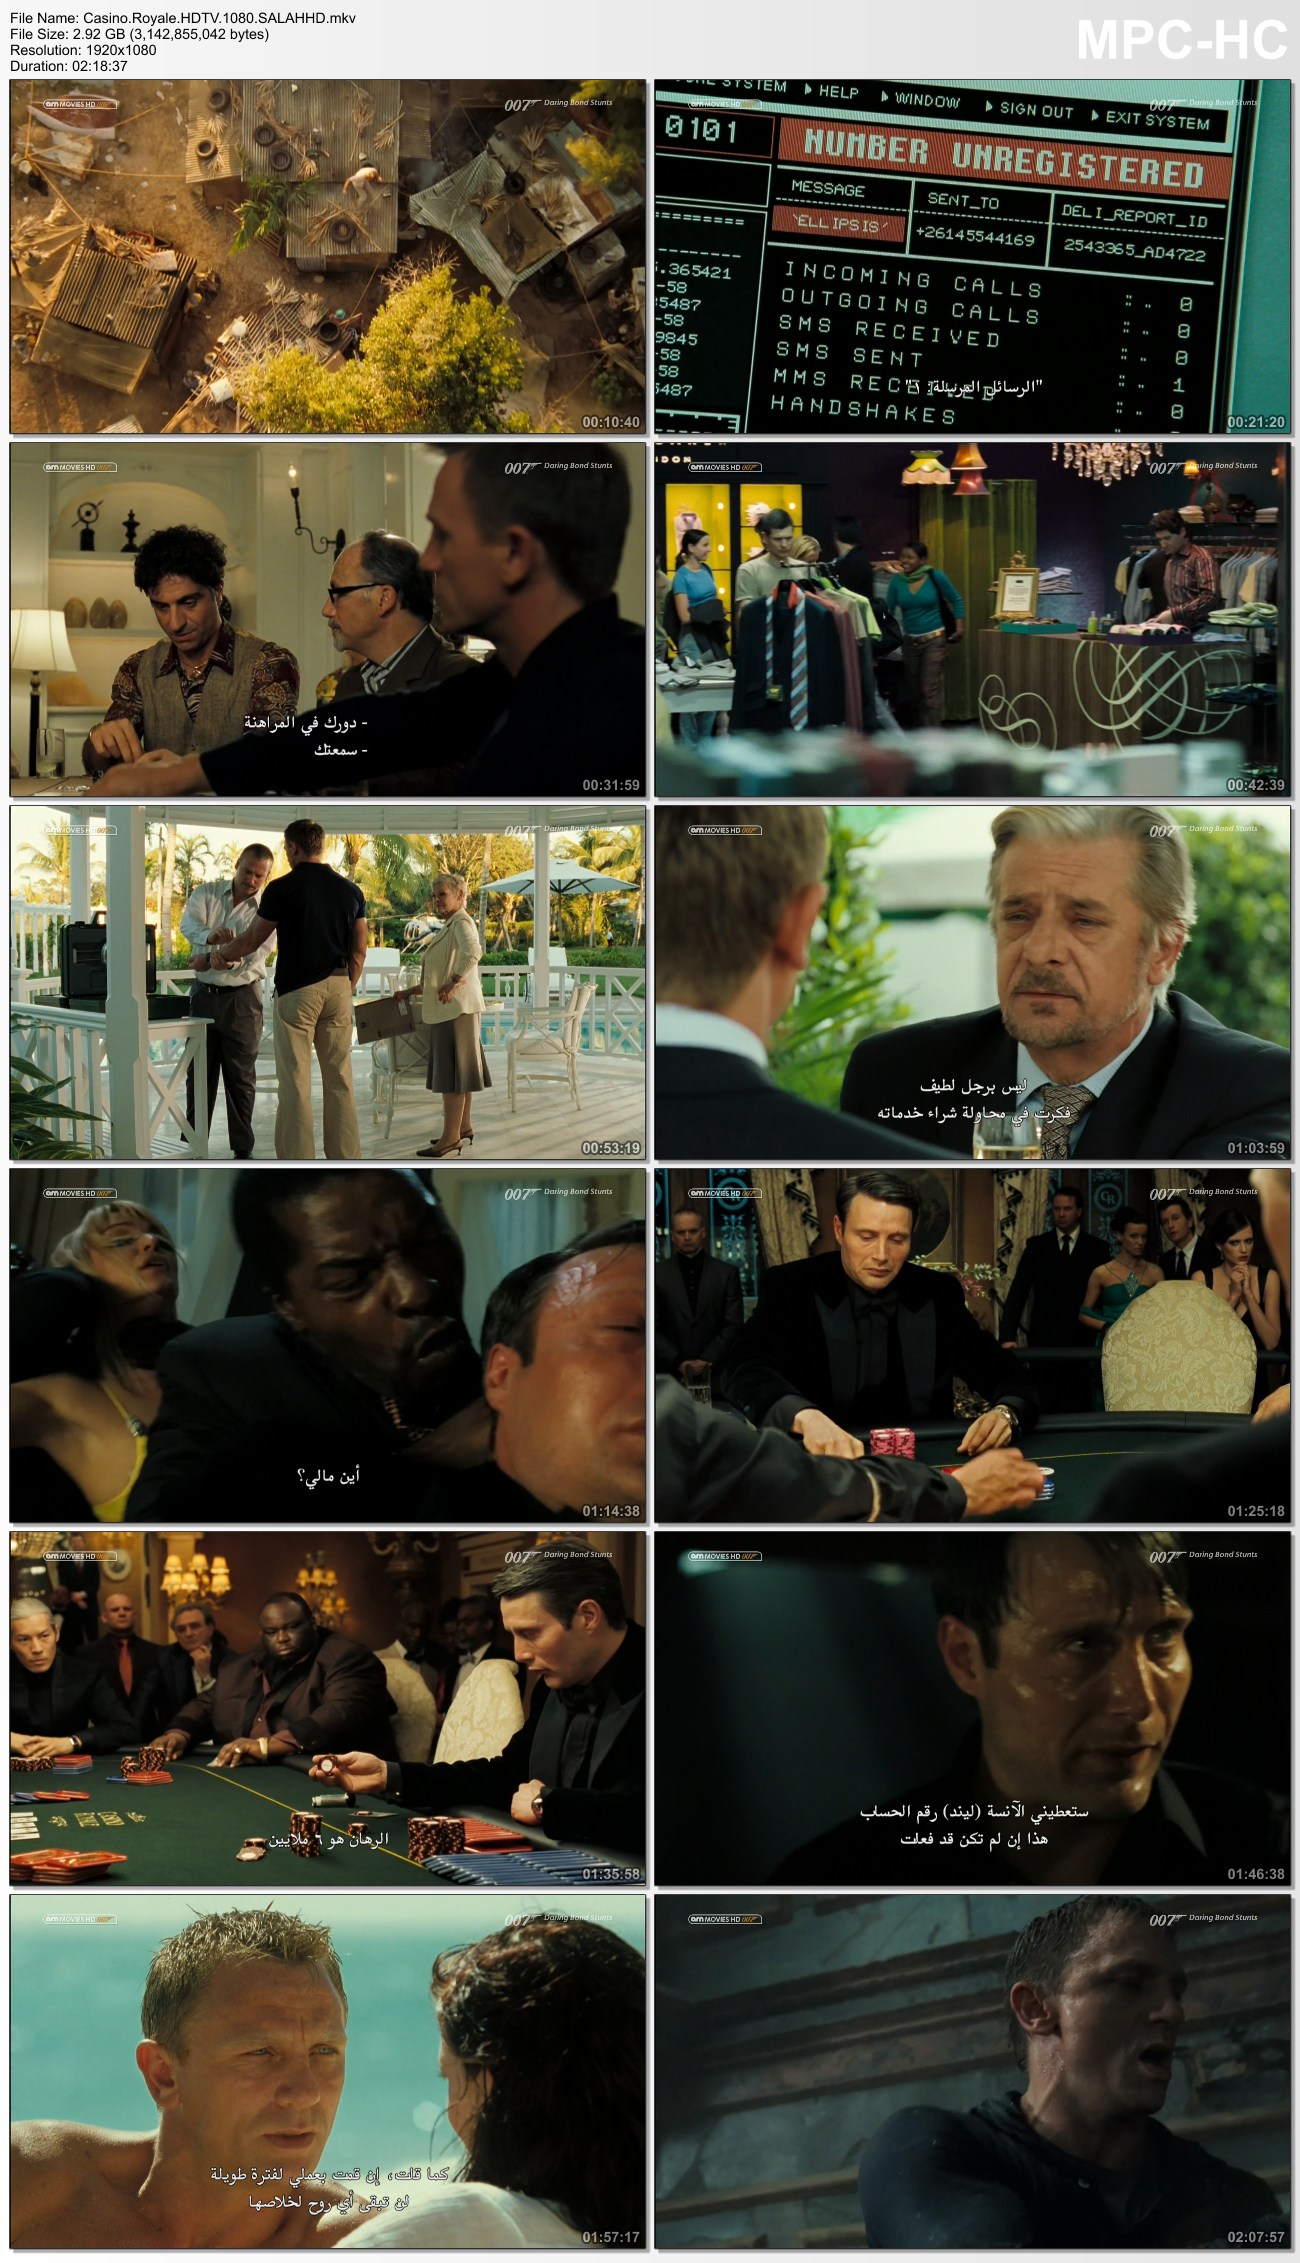 casino royale commentary torrent